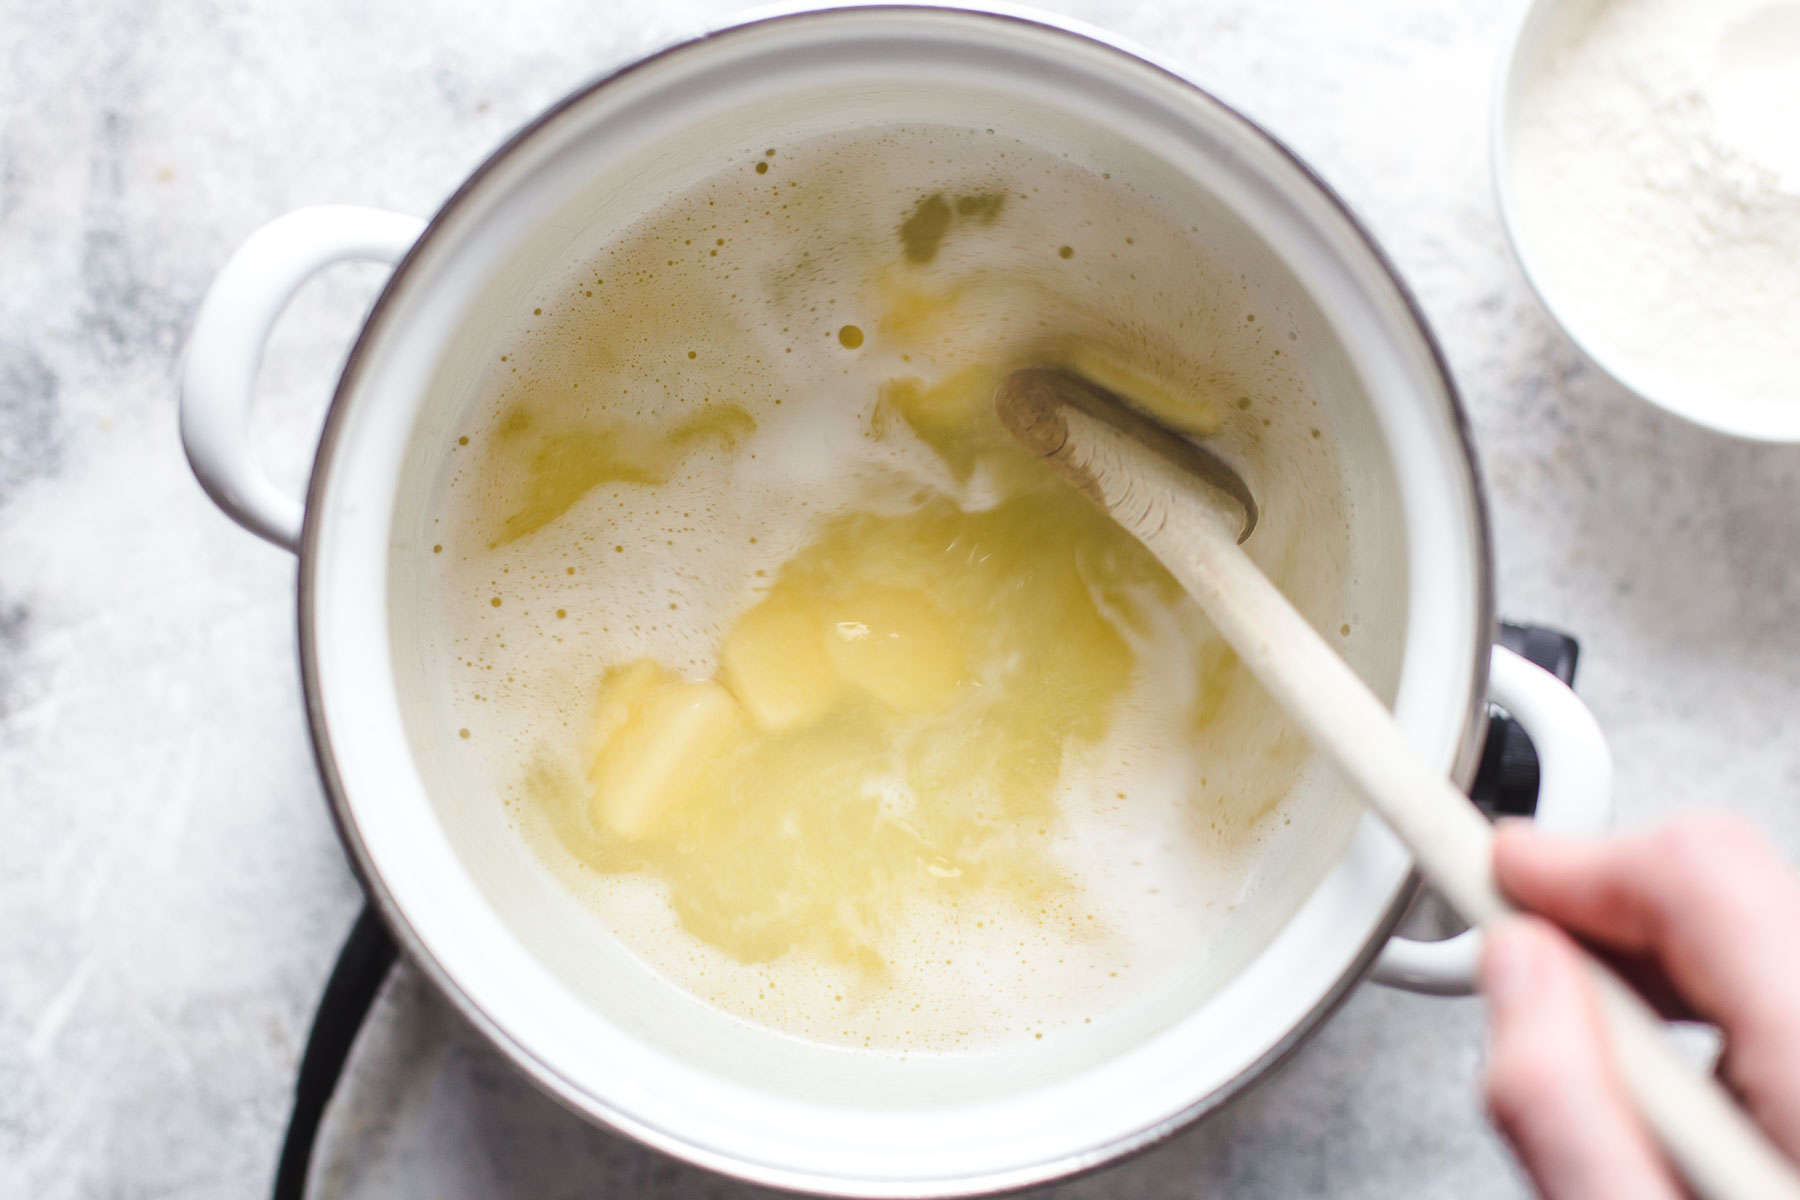 cooking water, butter, sugar, and salt in a pot